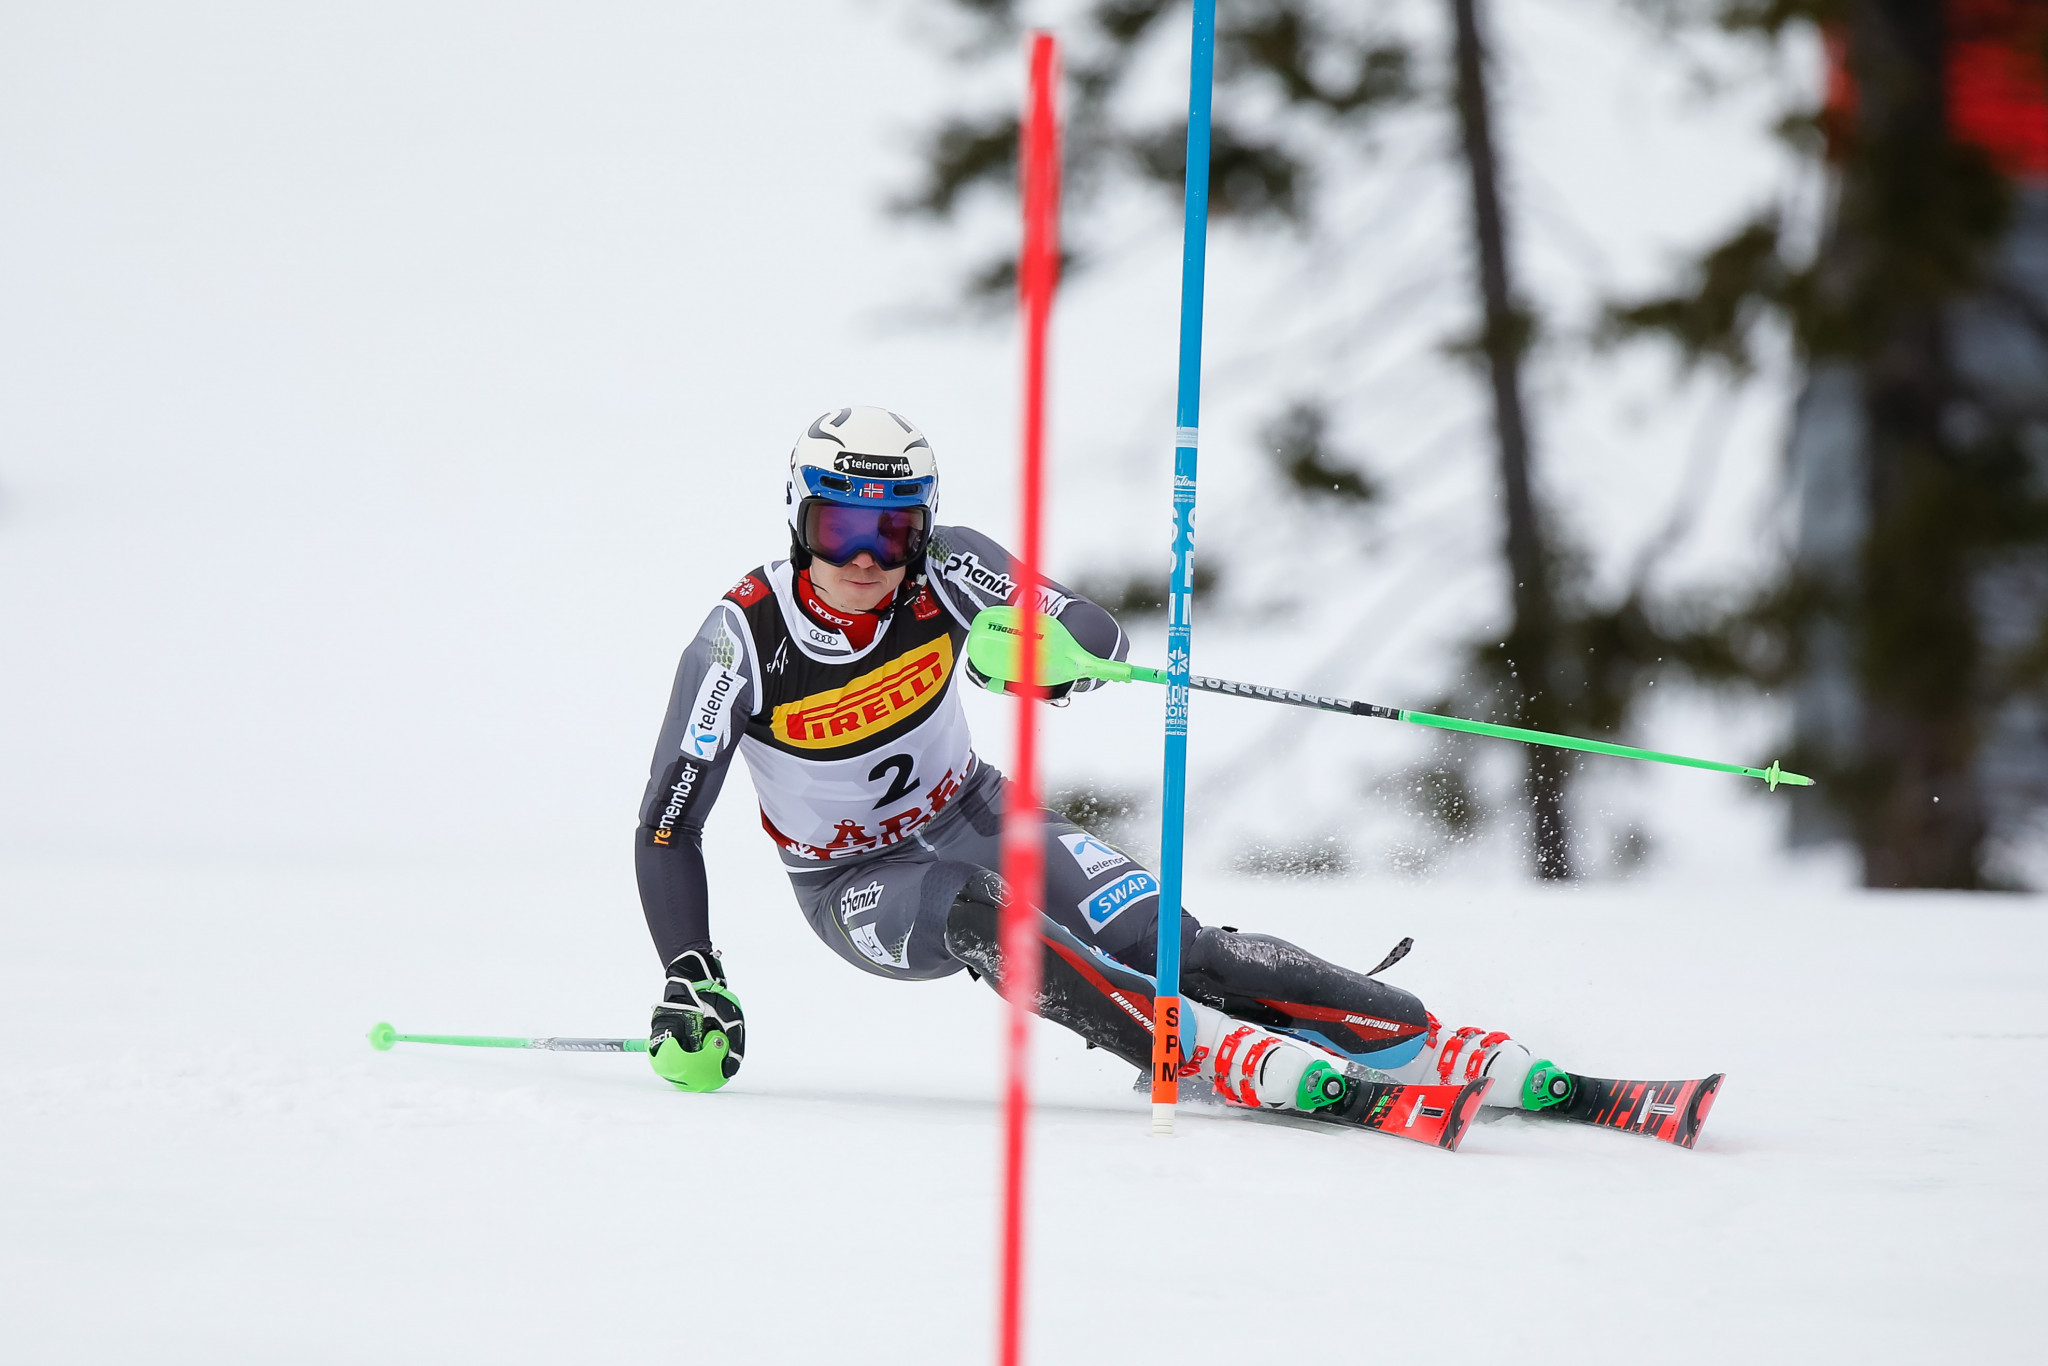 Henrik Kristoffersen was hoping to add to his giant slalom victory ©Getty Images